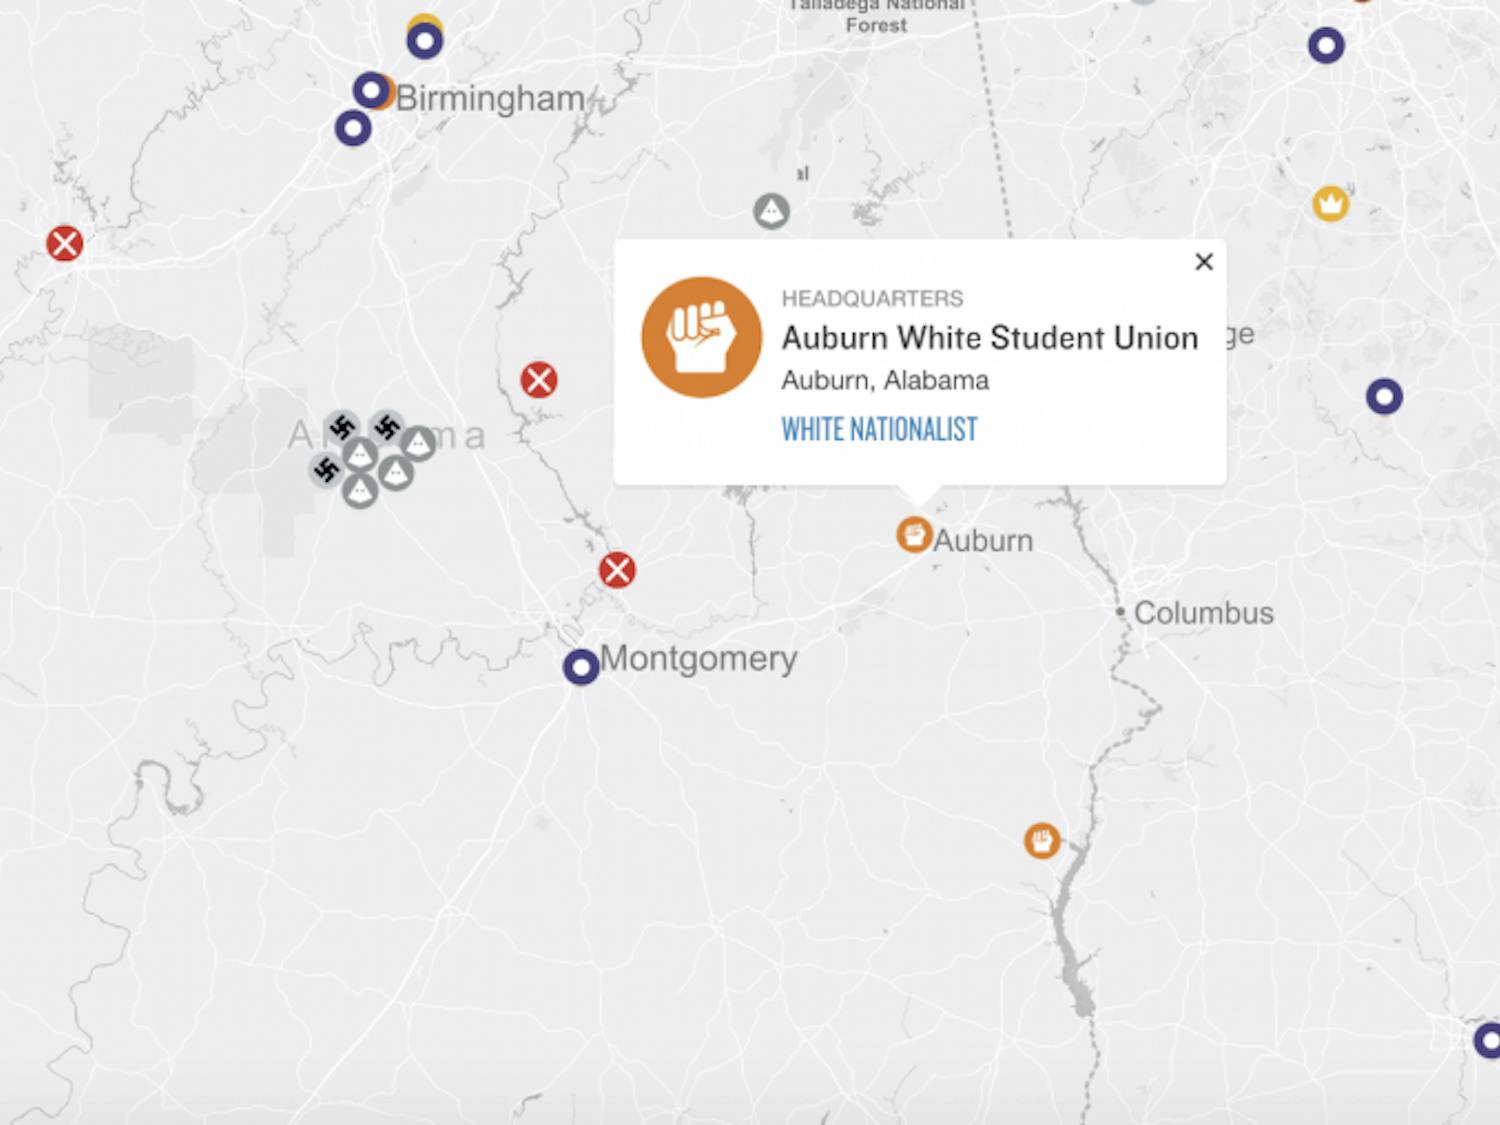 The Auburn White Student Union has been listed as a hate group on the SPLC's Hate Map.